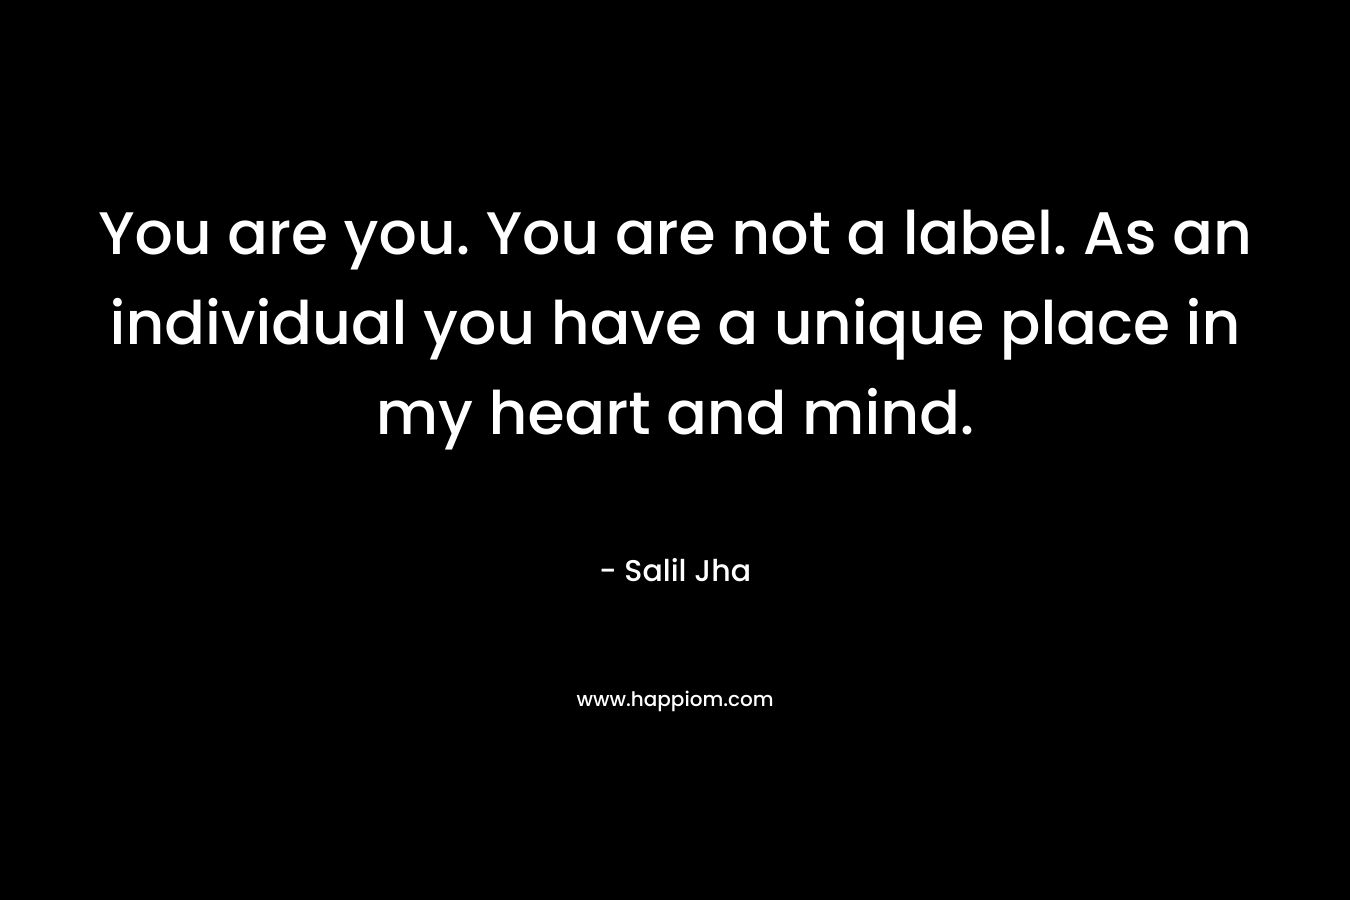 You are you. You are not a label. As an individual you have a unique place in my heart and mind.